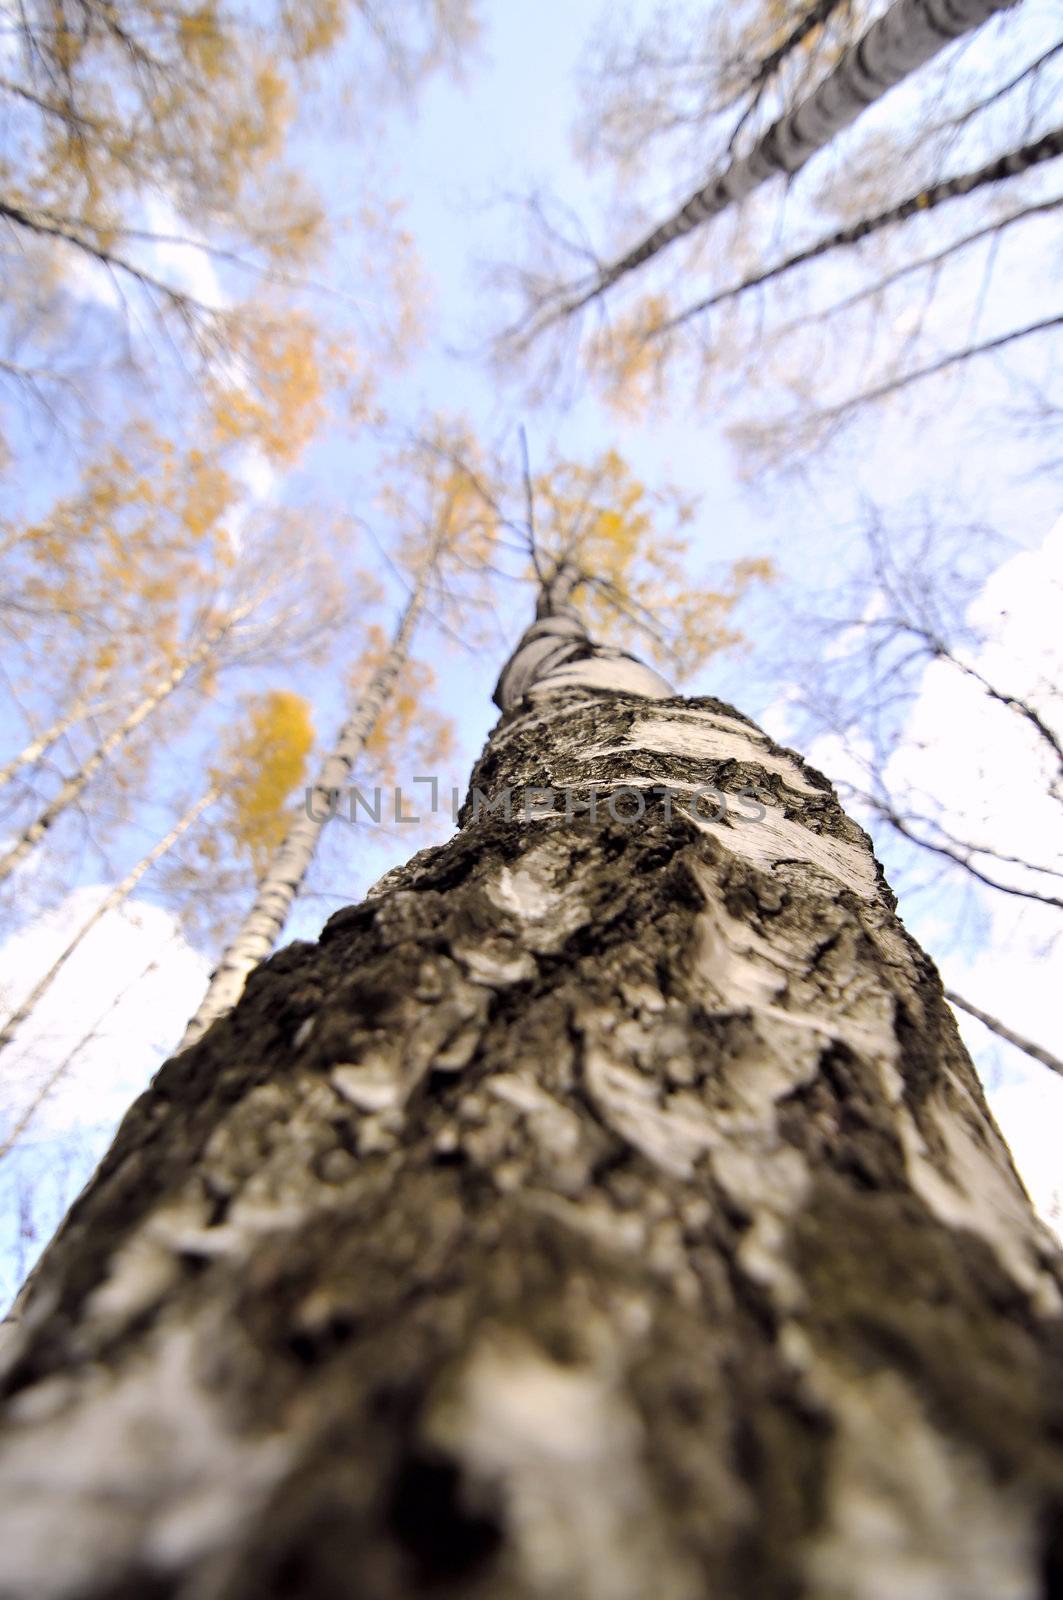 ant's eye view on a birch forest